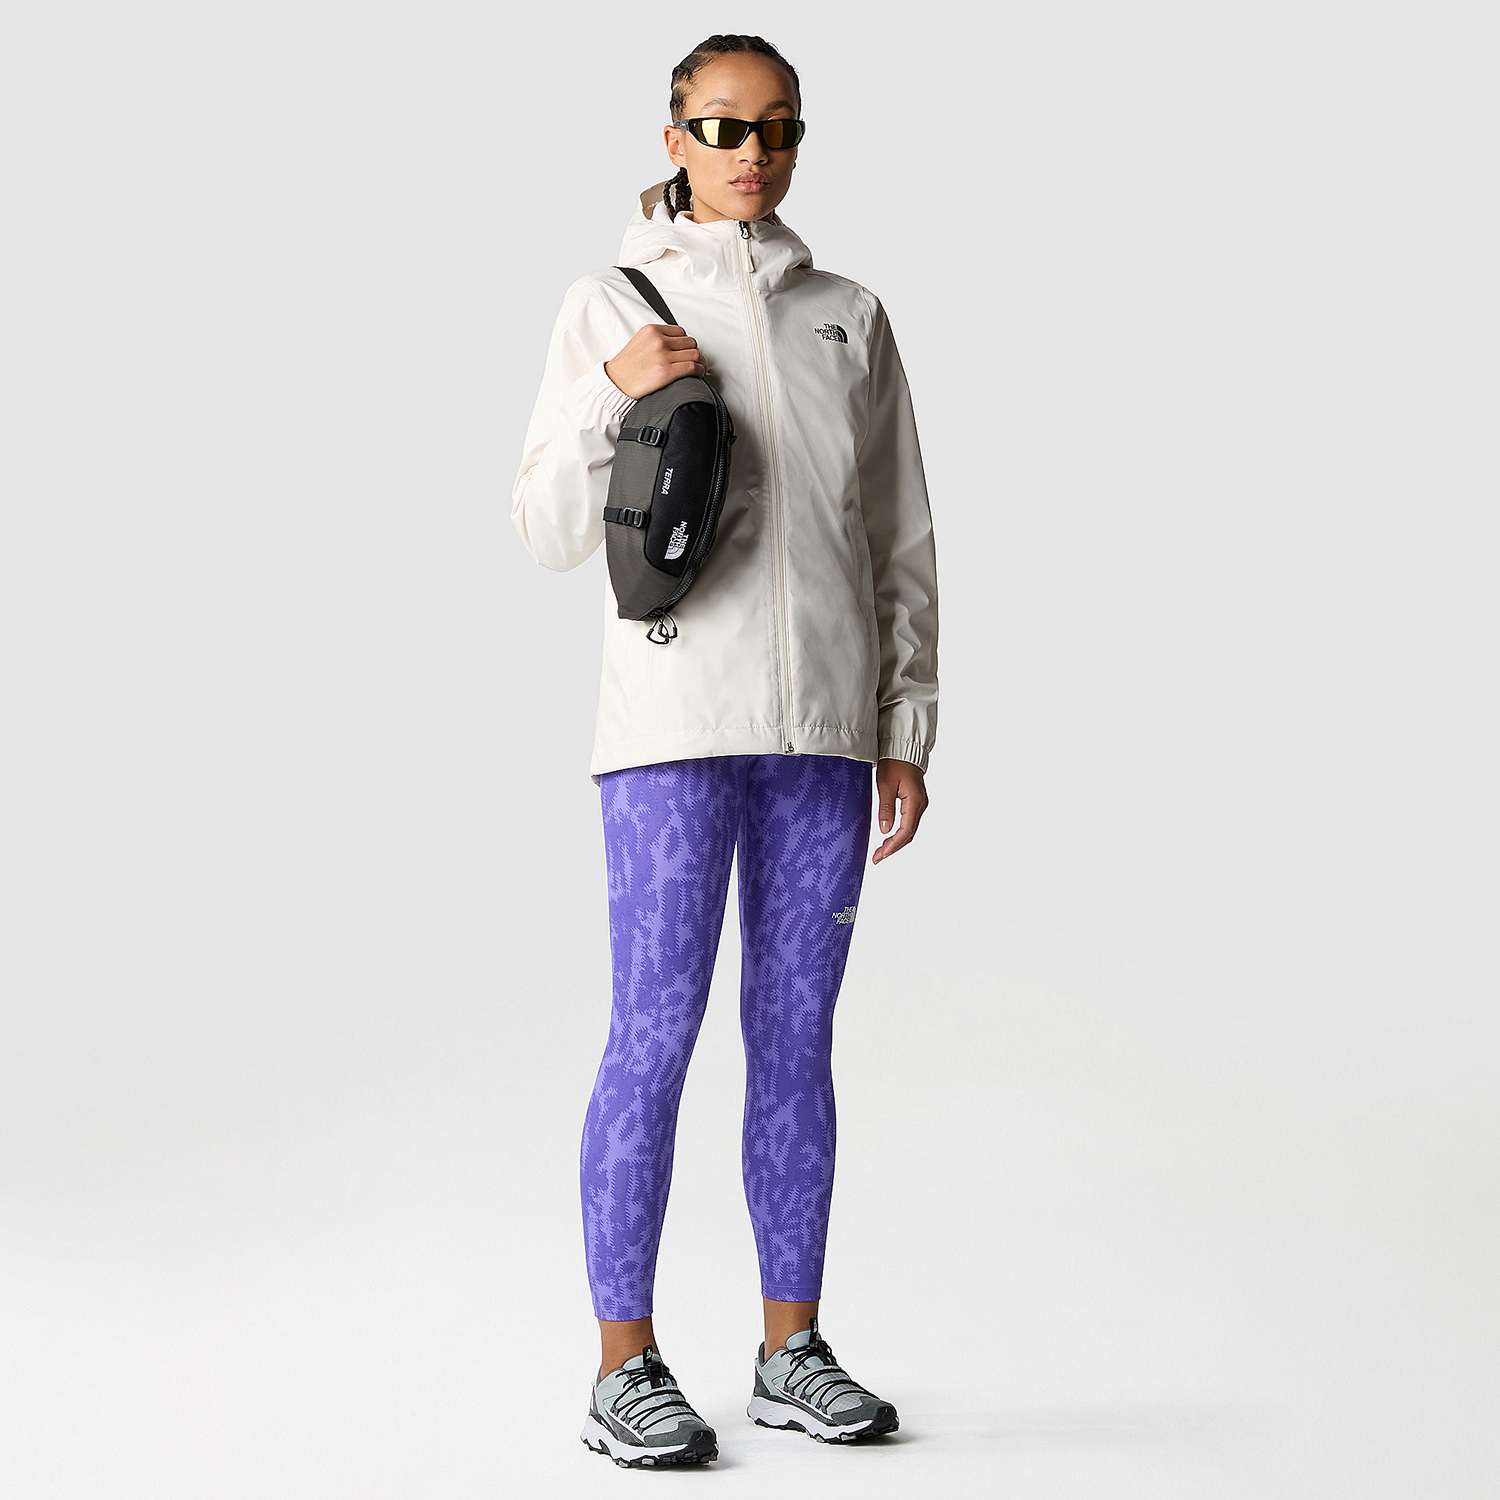 The North Face Quest Chaqueta - White Dune